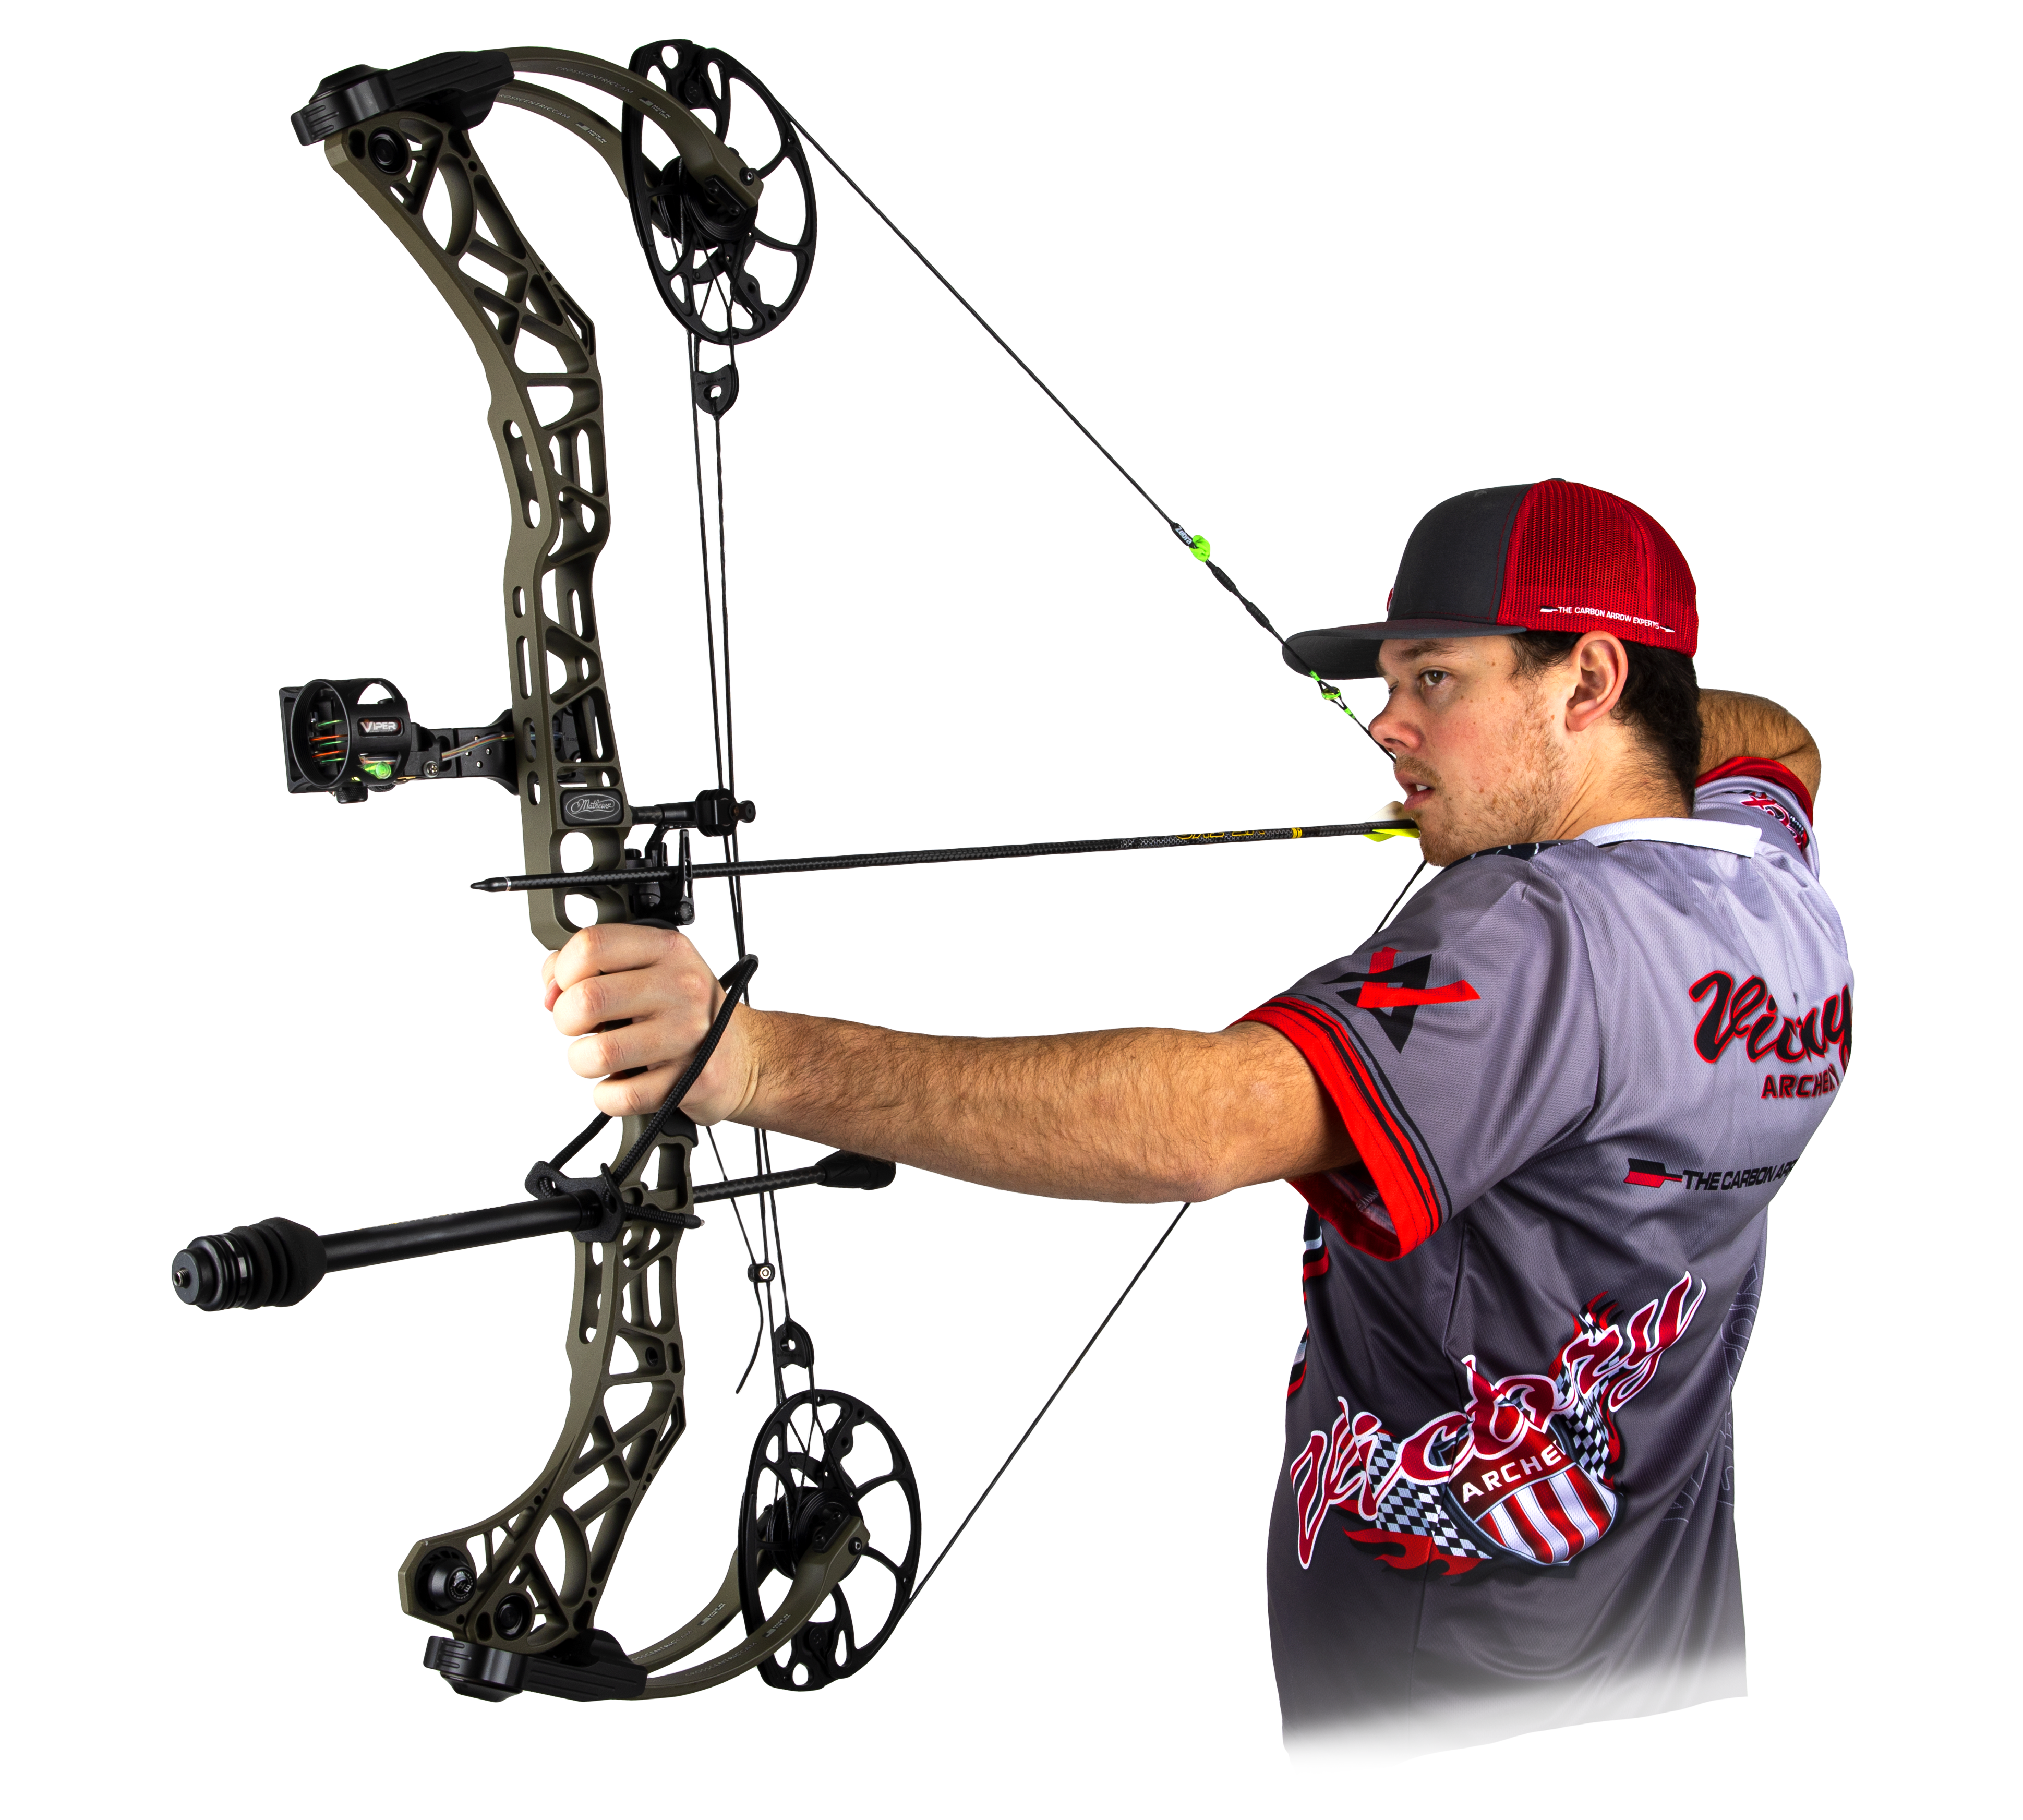 Victory Archery - The Carbon Arrow Experts